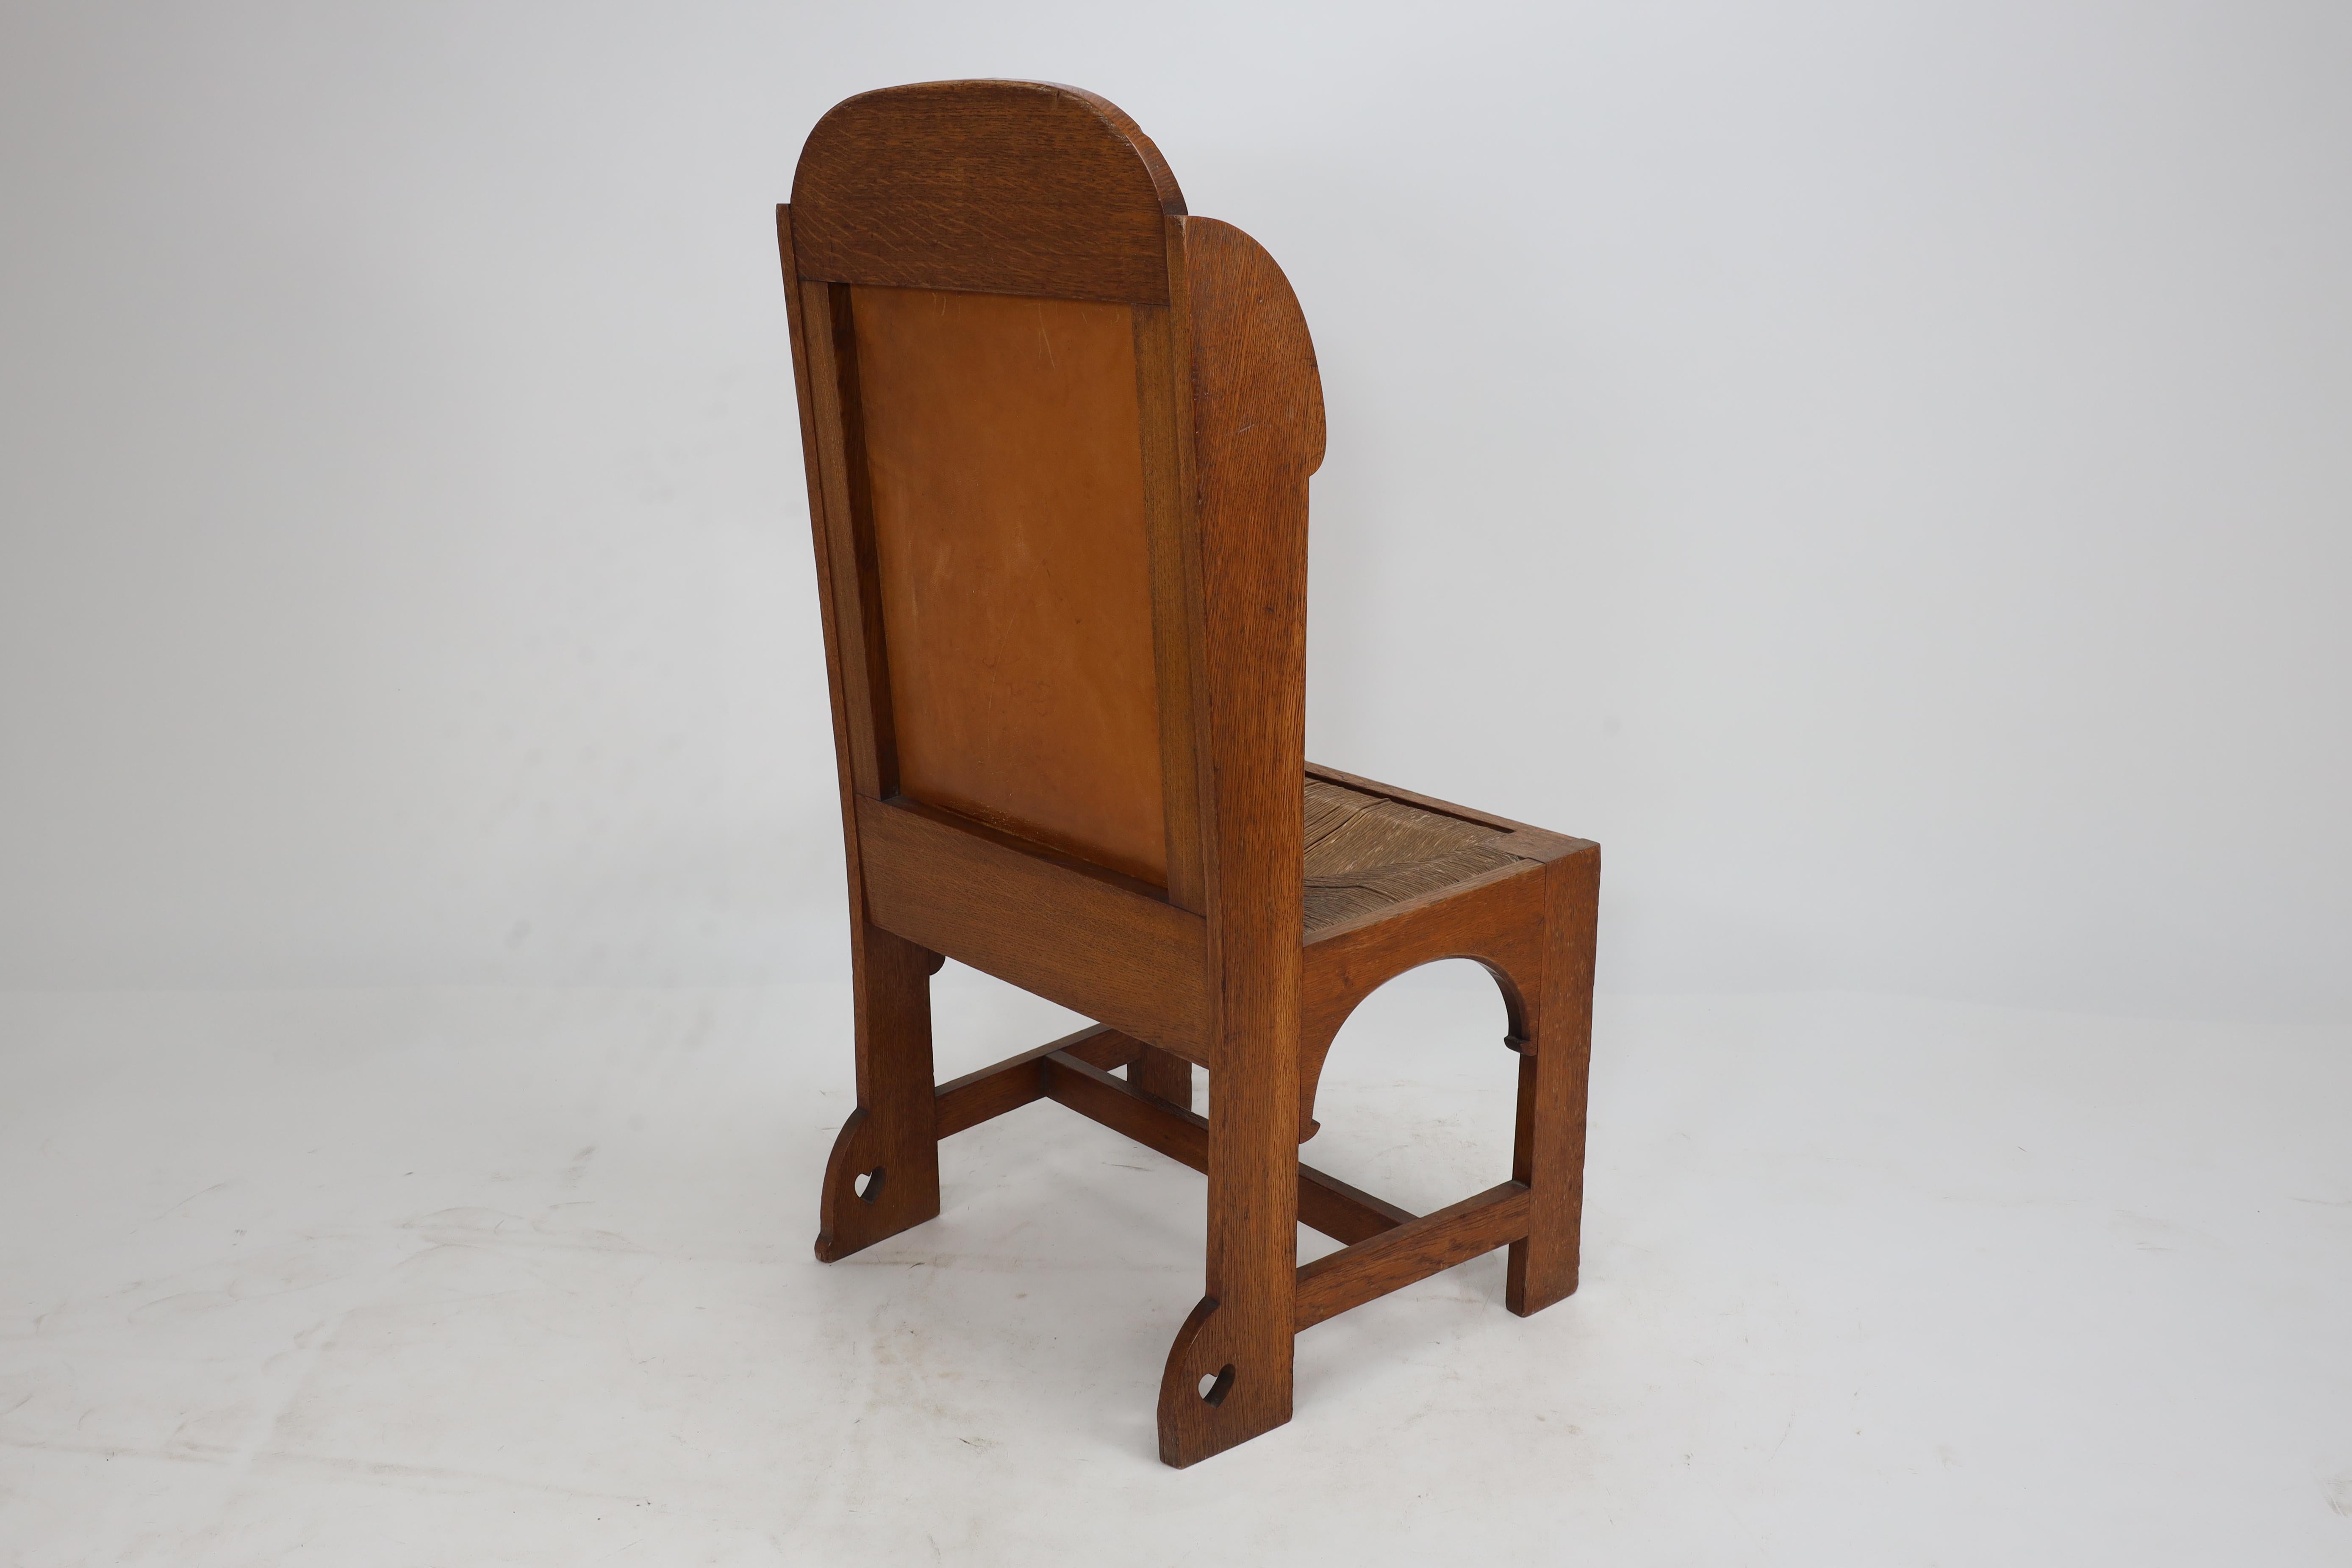 E G Punnet attributed. Probably made by William Birch. An oak wing back chair For Sale 10